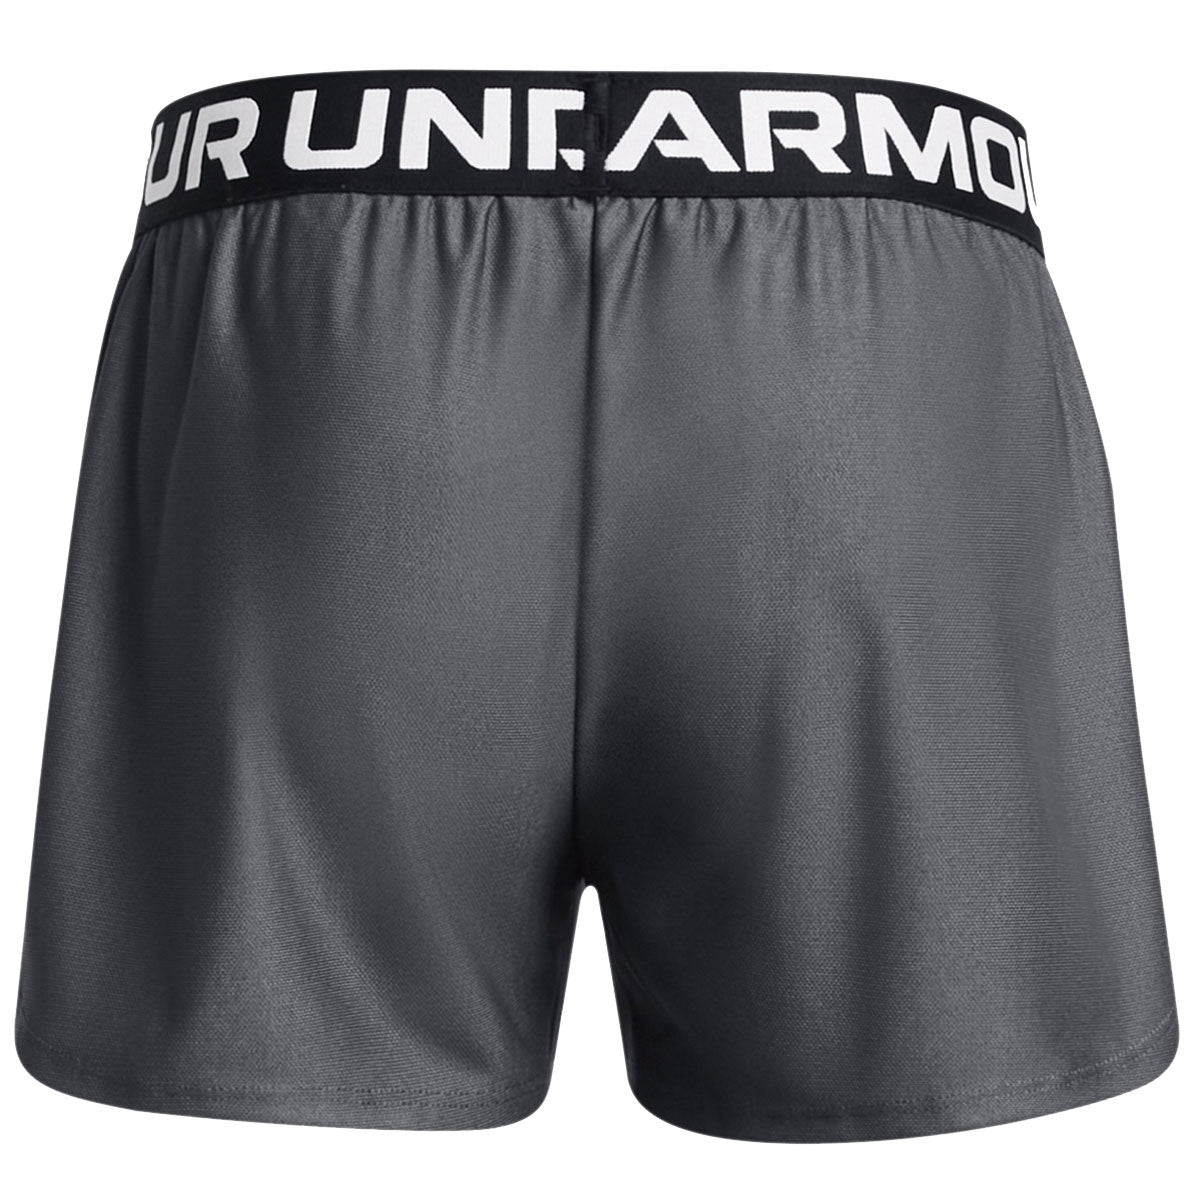 Under Armour Play Up Shorts - Girls - Pitch Grey/Metallic Silver